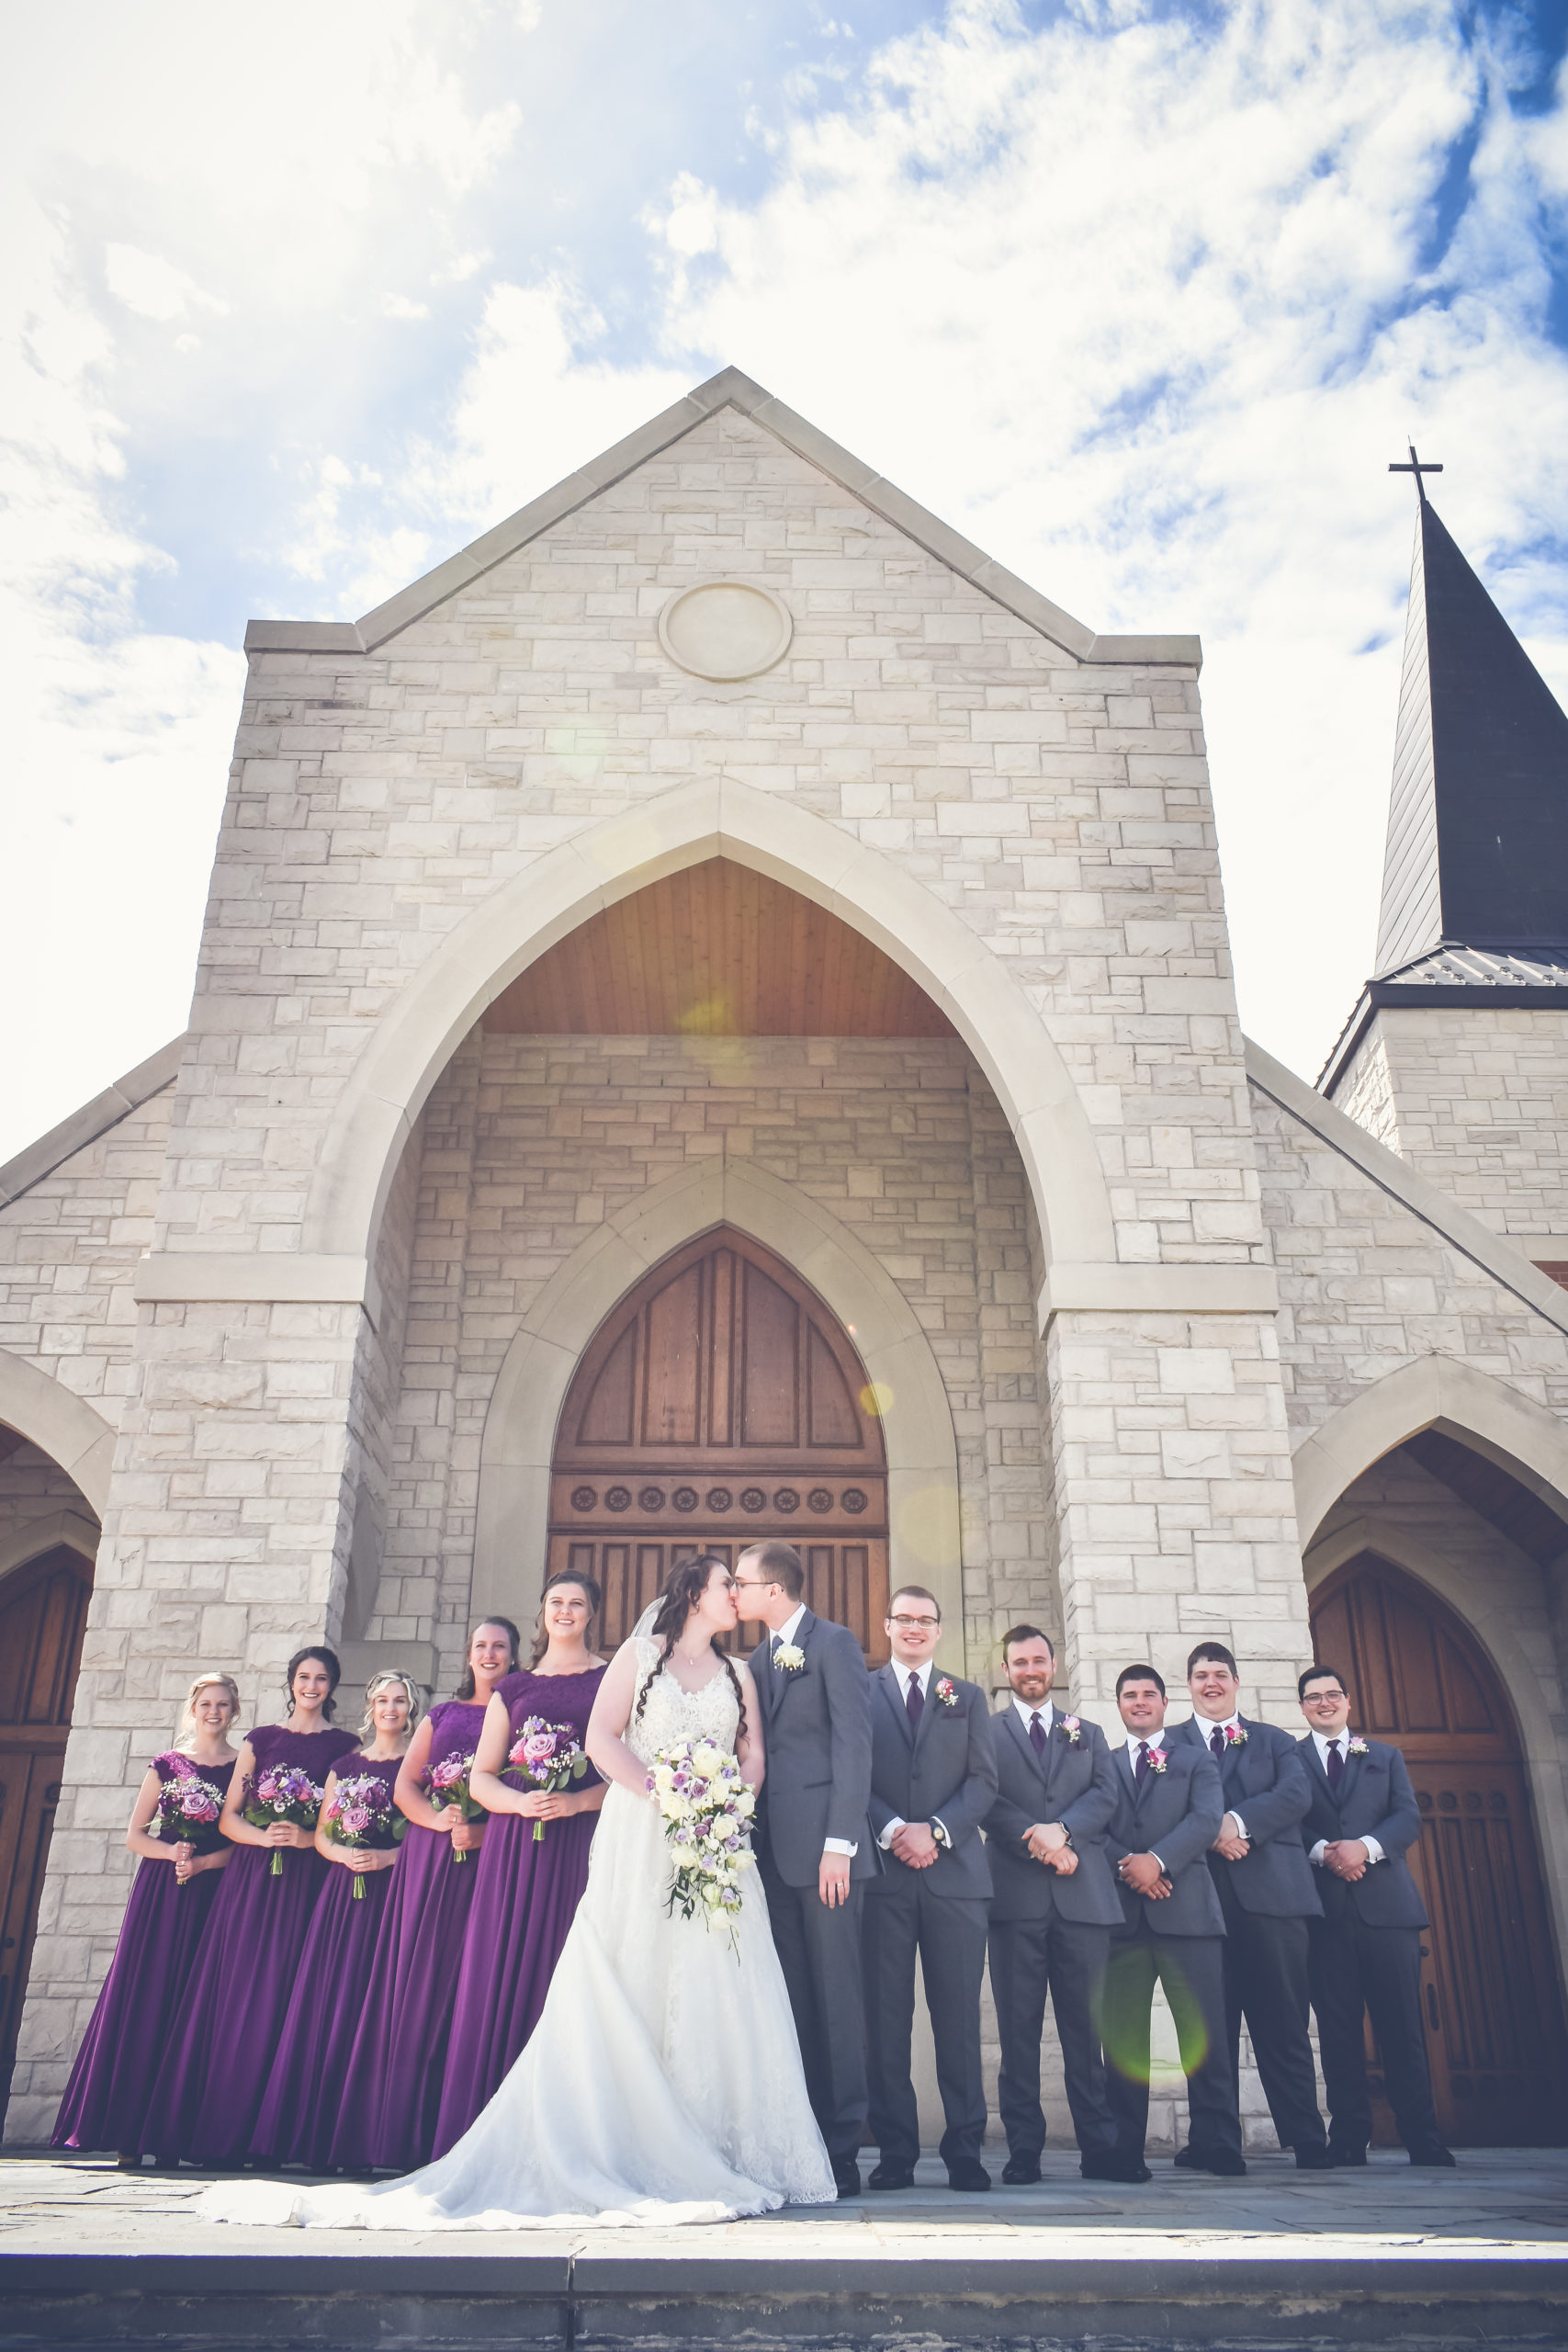 Wedding Party in purple in front of church